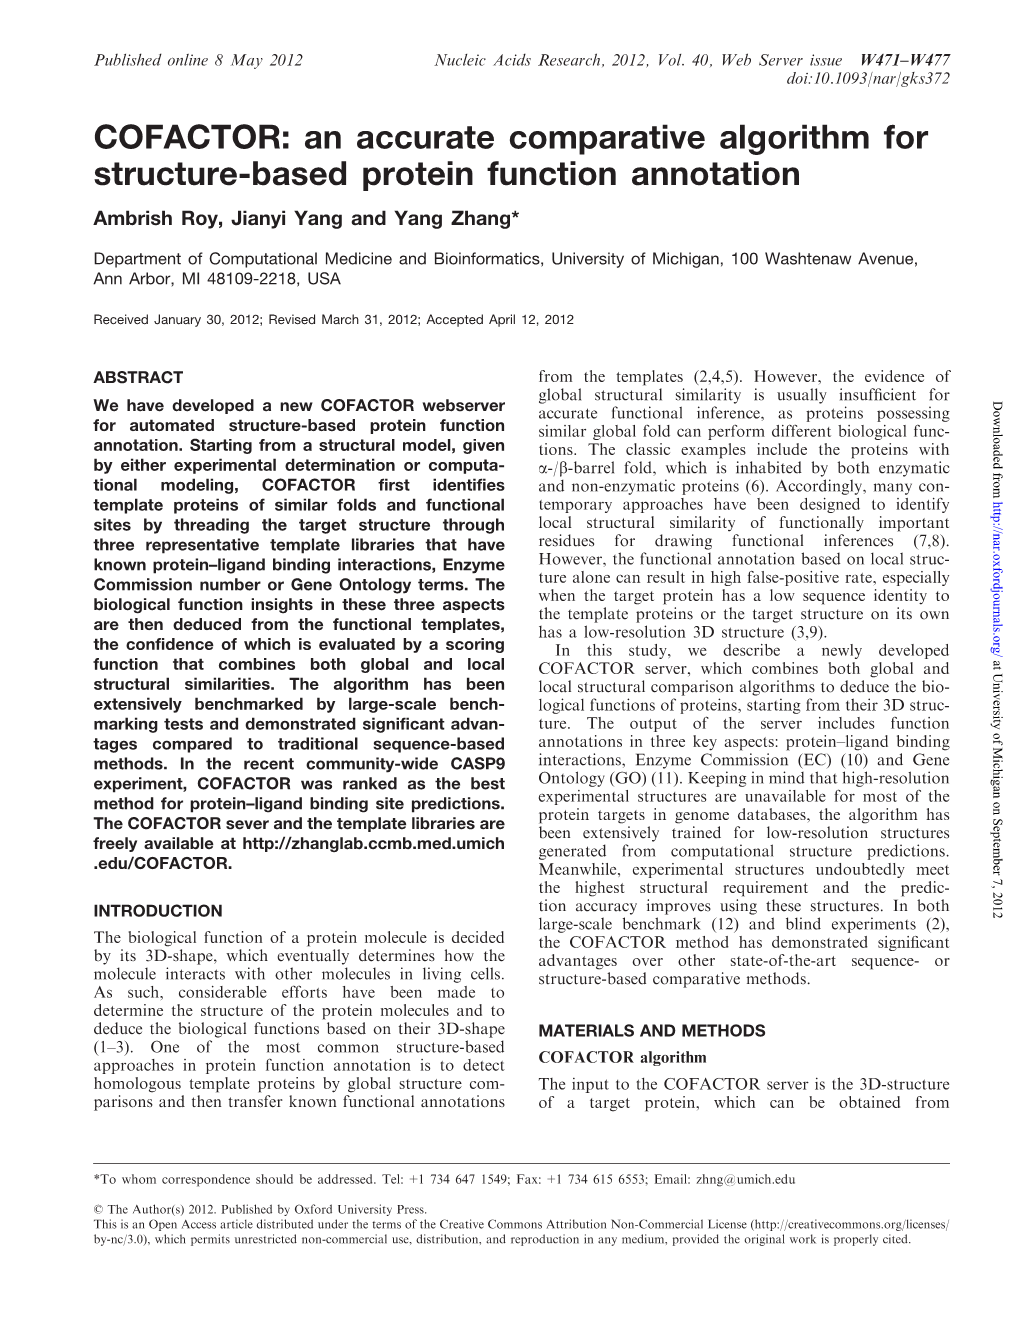 COFACTOR: an Accurate Comparative Algorithm for Structure-Based Protein Function Annotation Ambrish Roy, Jianyi Yang and Yang Zhang*